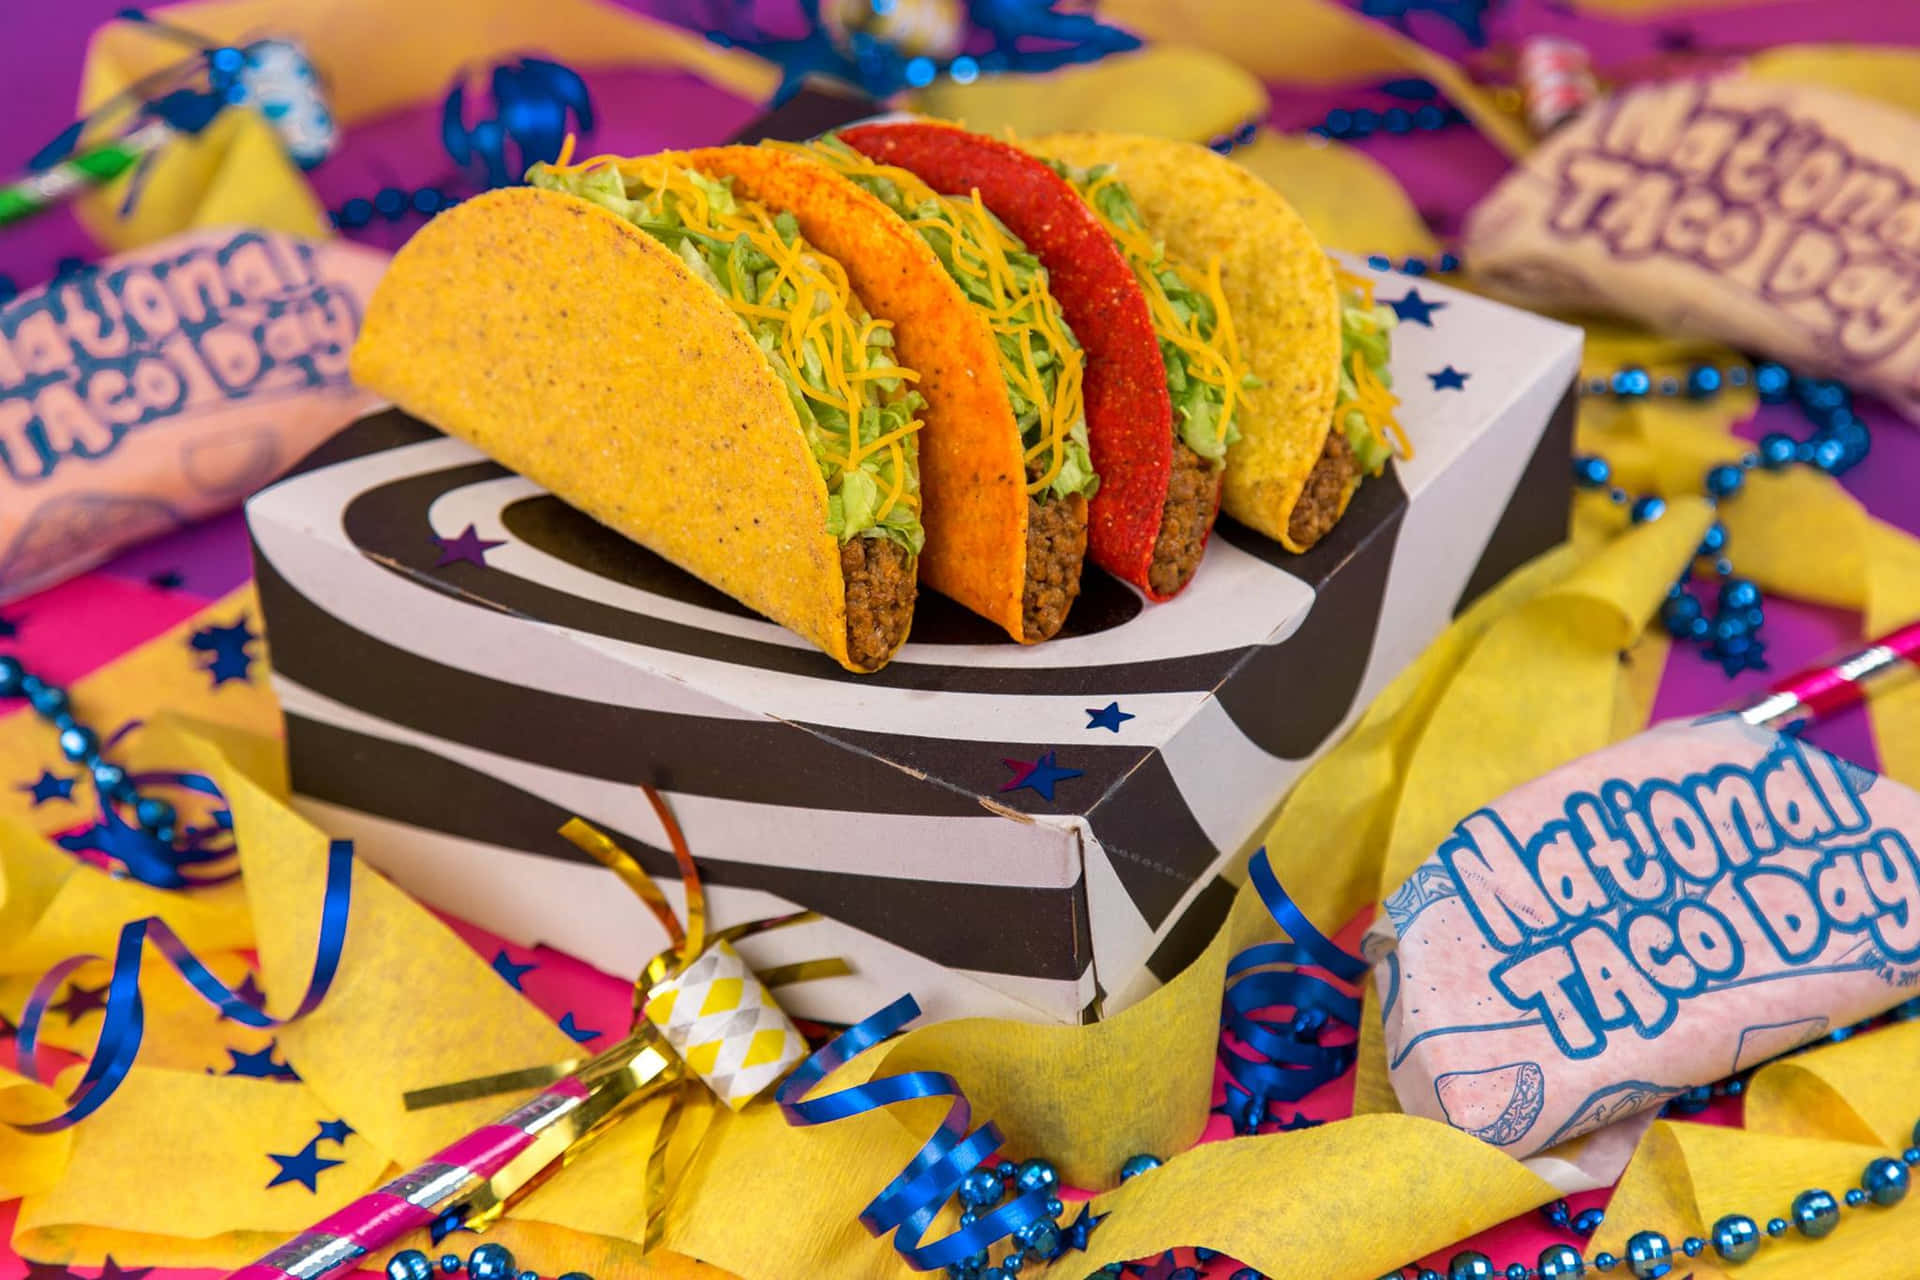 Get your taco cravings satisfied, only at Taco Bell.